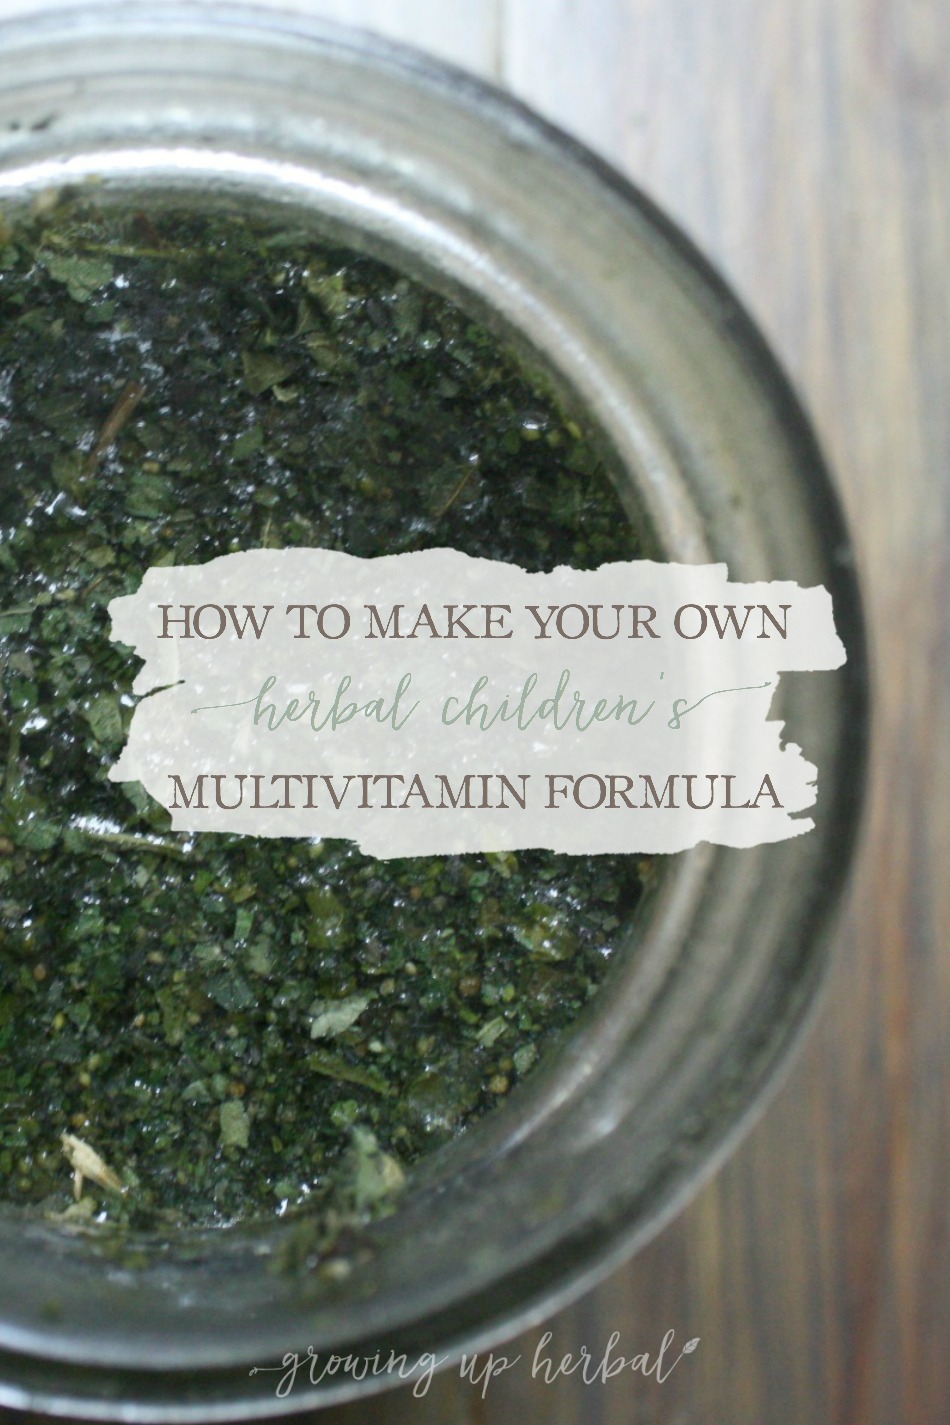 How To Make Your Own Herbal Children’s Multi-Vitamin Formula | GrowingUpHerbal.com | Learn to make your own herbal children's multi-vitamin formula to boost your child's nutrition using herbs! It's simple and tastes great!